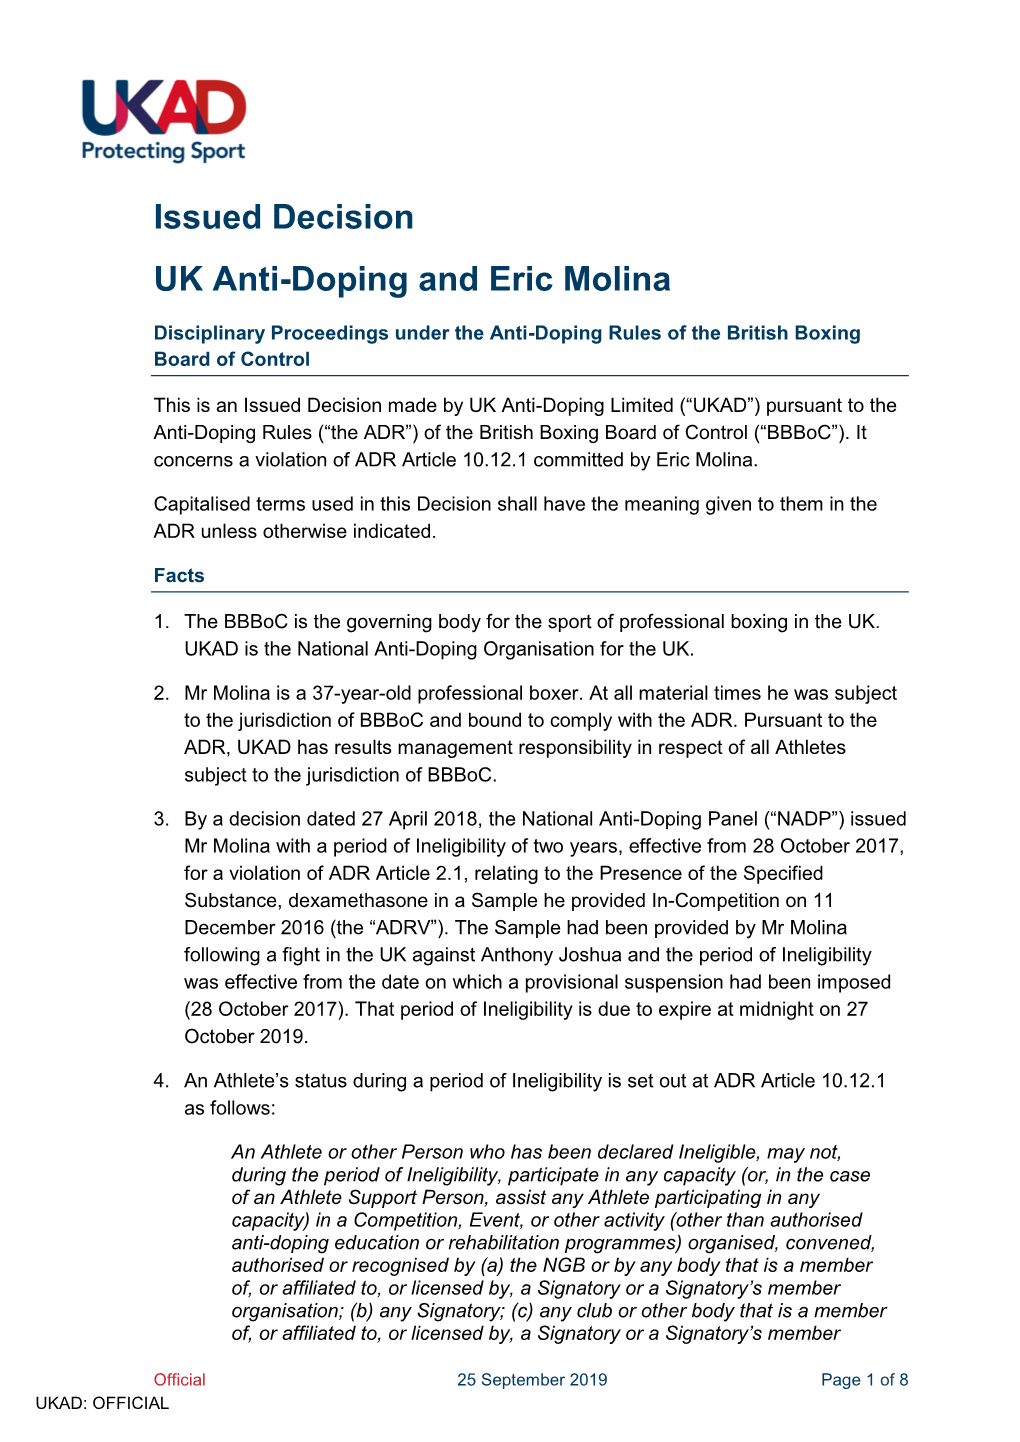 Issued Decision UK Anti-Doping and Eric Molina